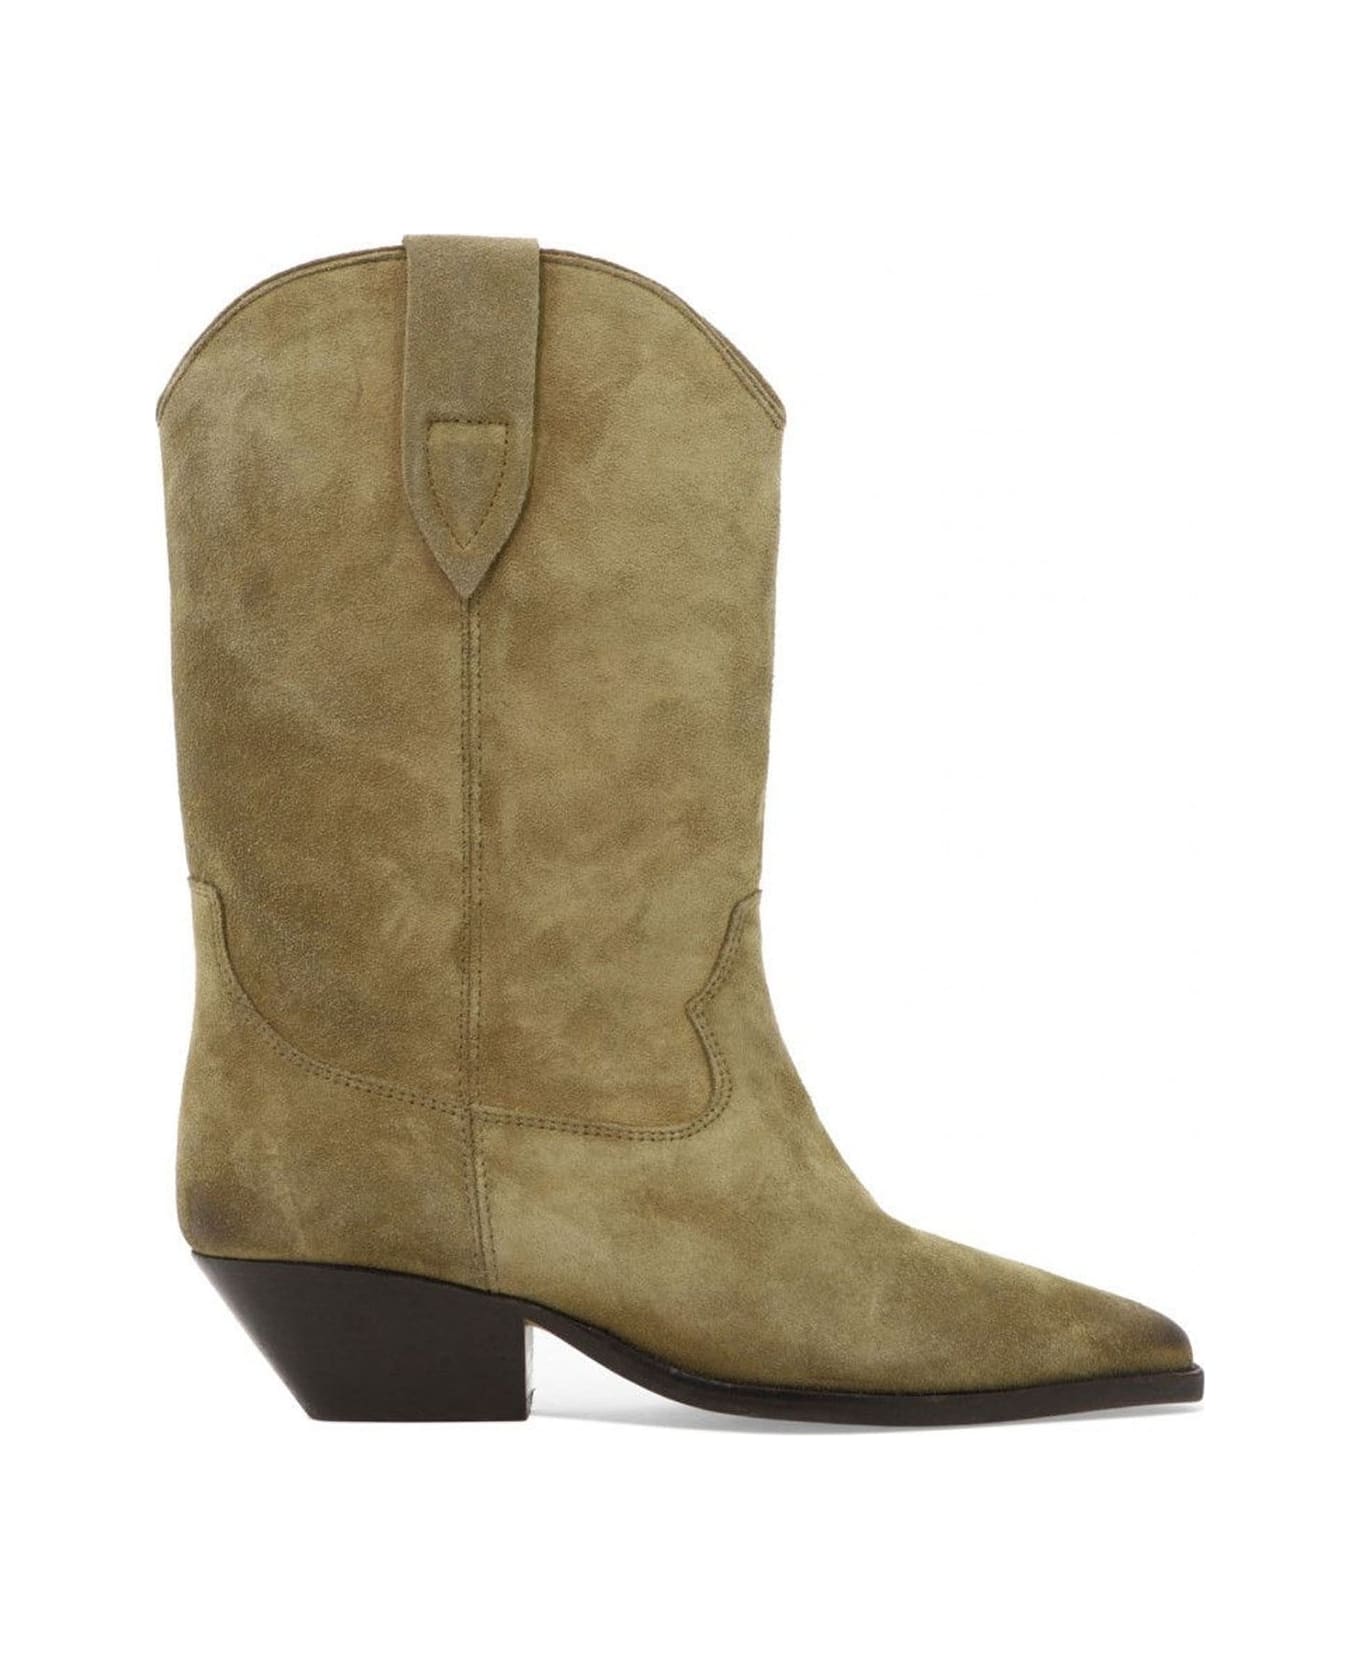 Isabel Marant Suede Boots - Green ブーツ